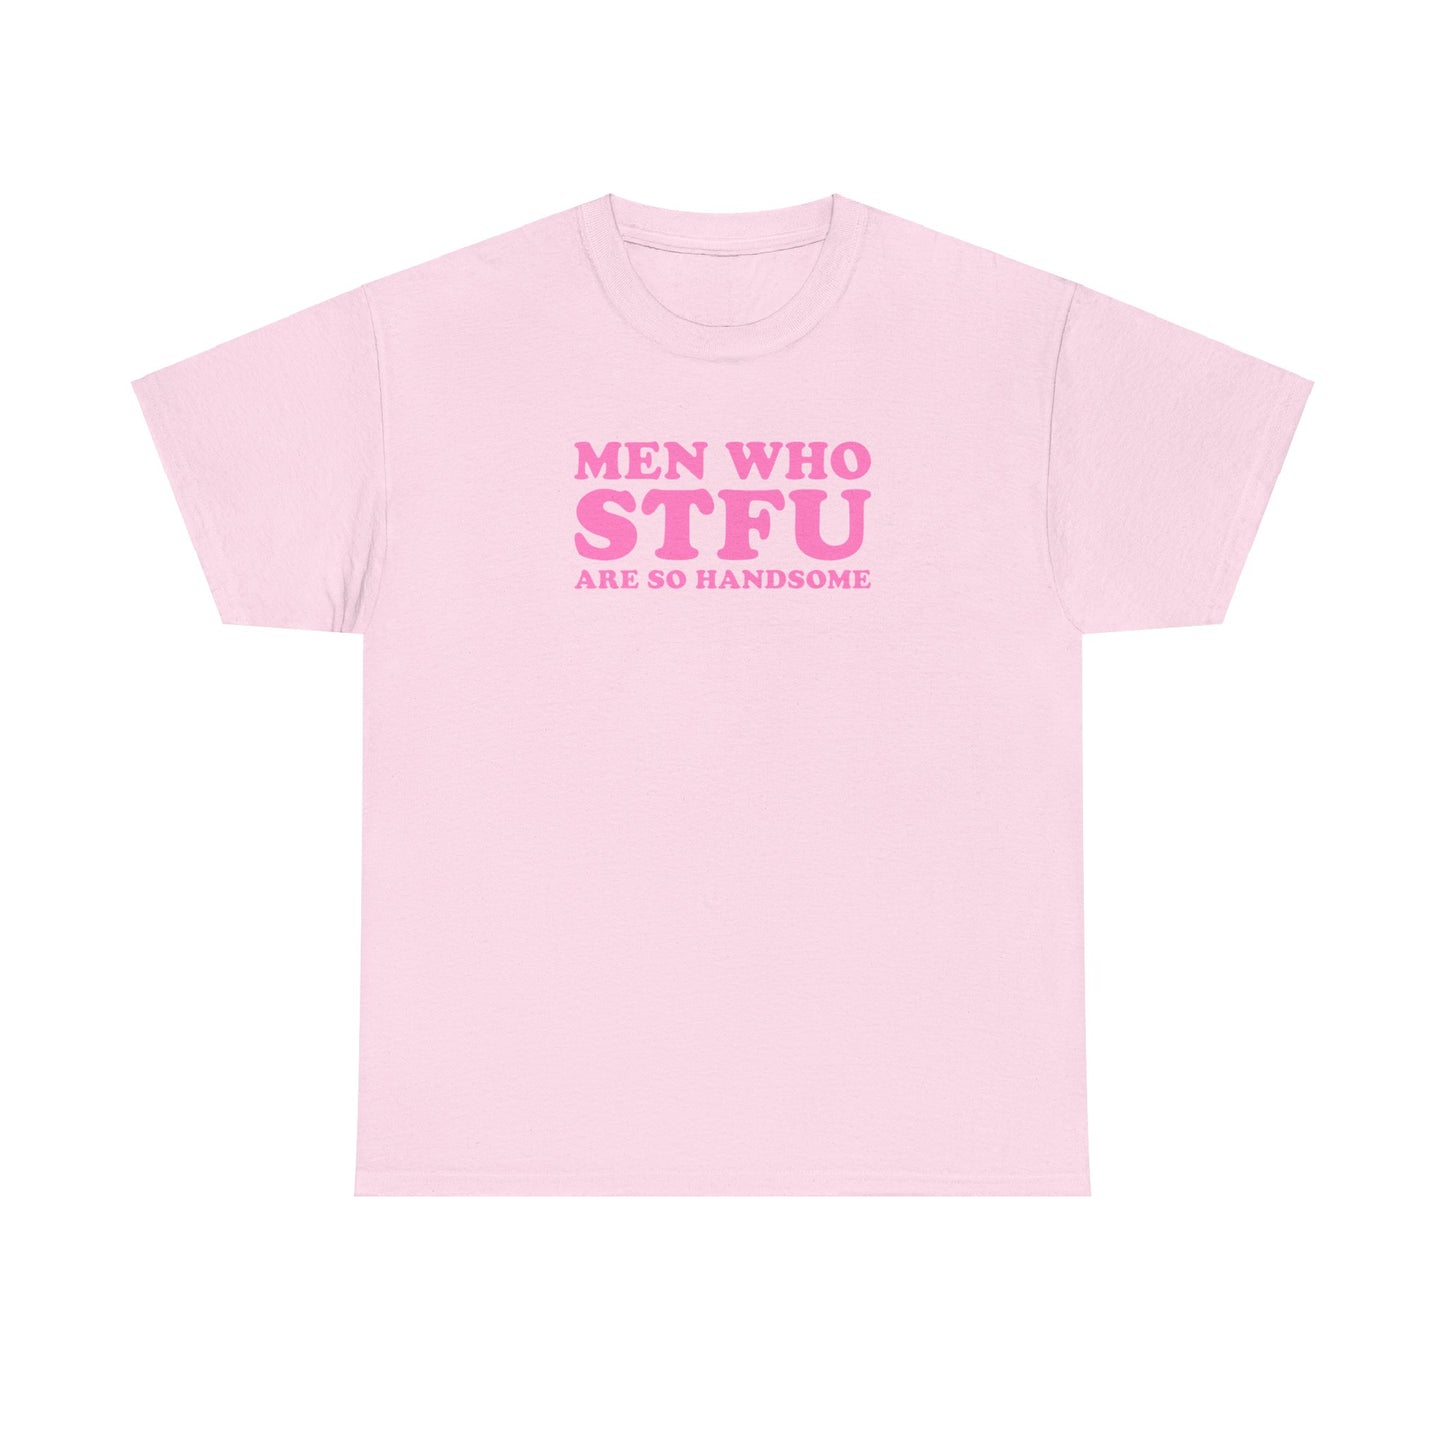 MEN WHO STFU ARE SO HANDSOME T-SHIRT